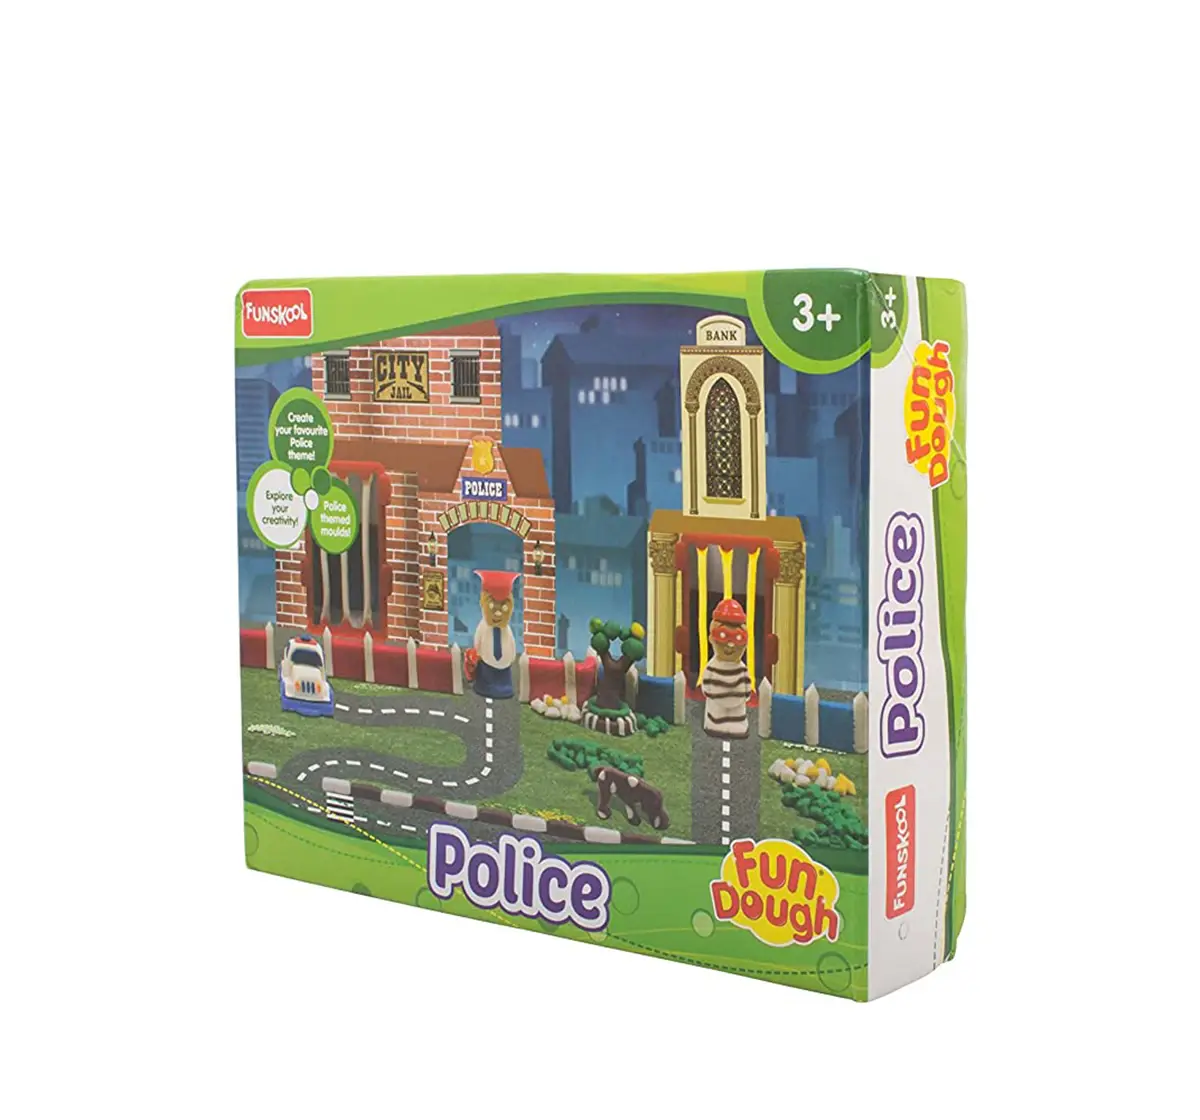 Fundough Police Dough Play Set for Kids age 3Y+